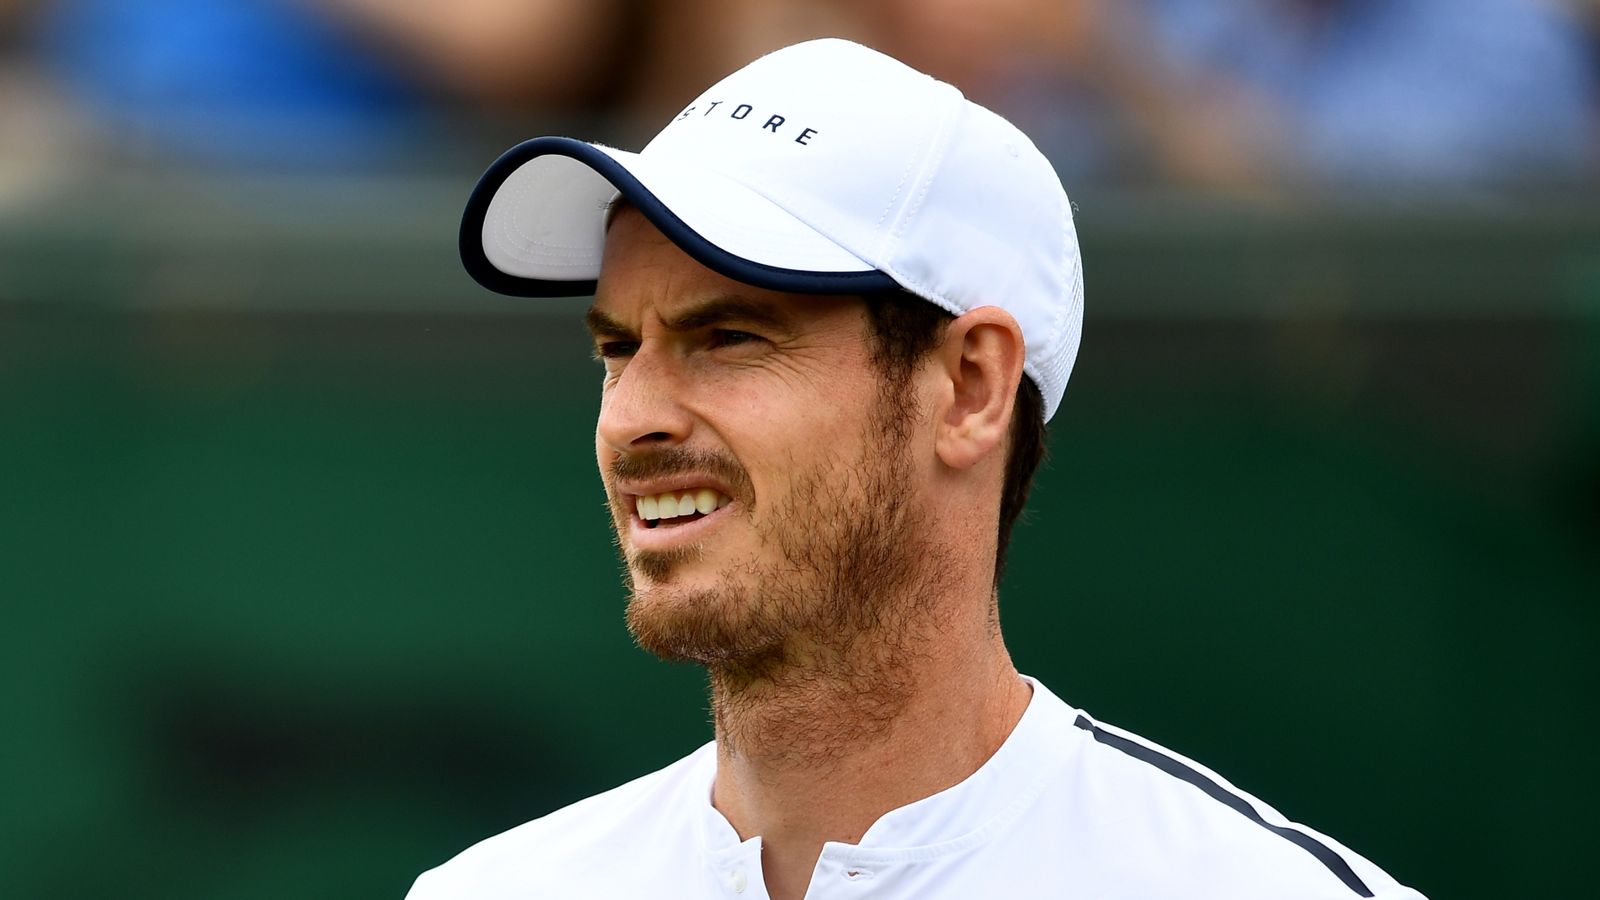 Andy Murray pulls out of Nottingham Open to focus on Queen's and